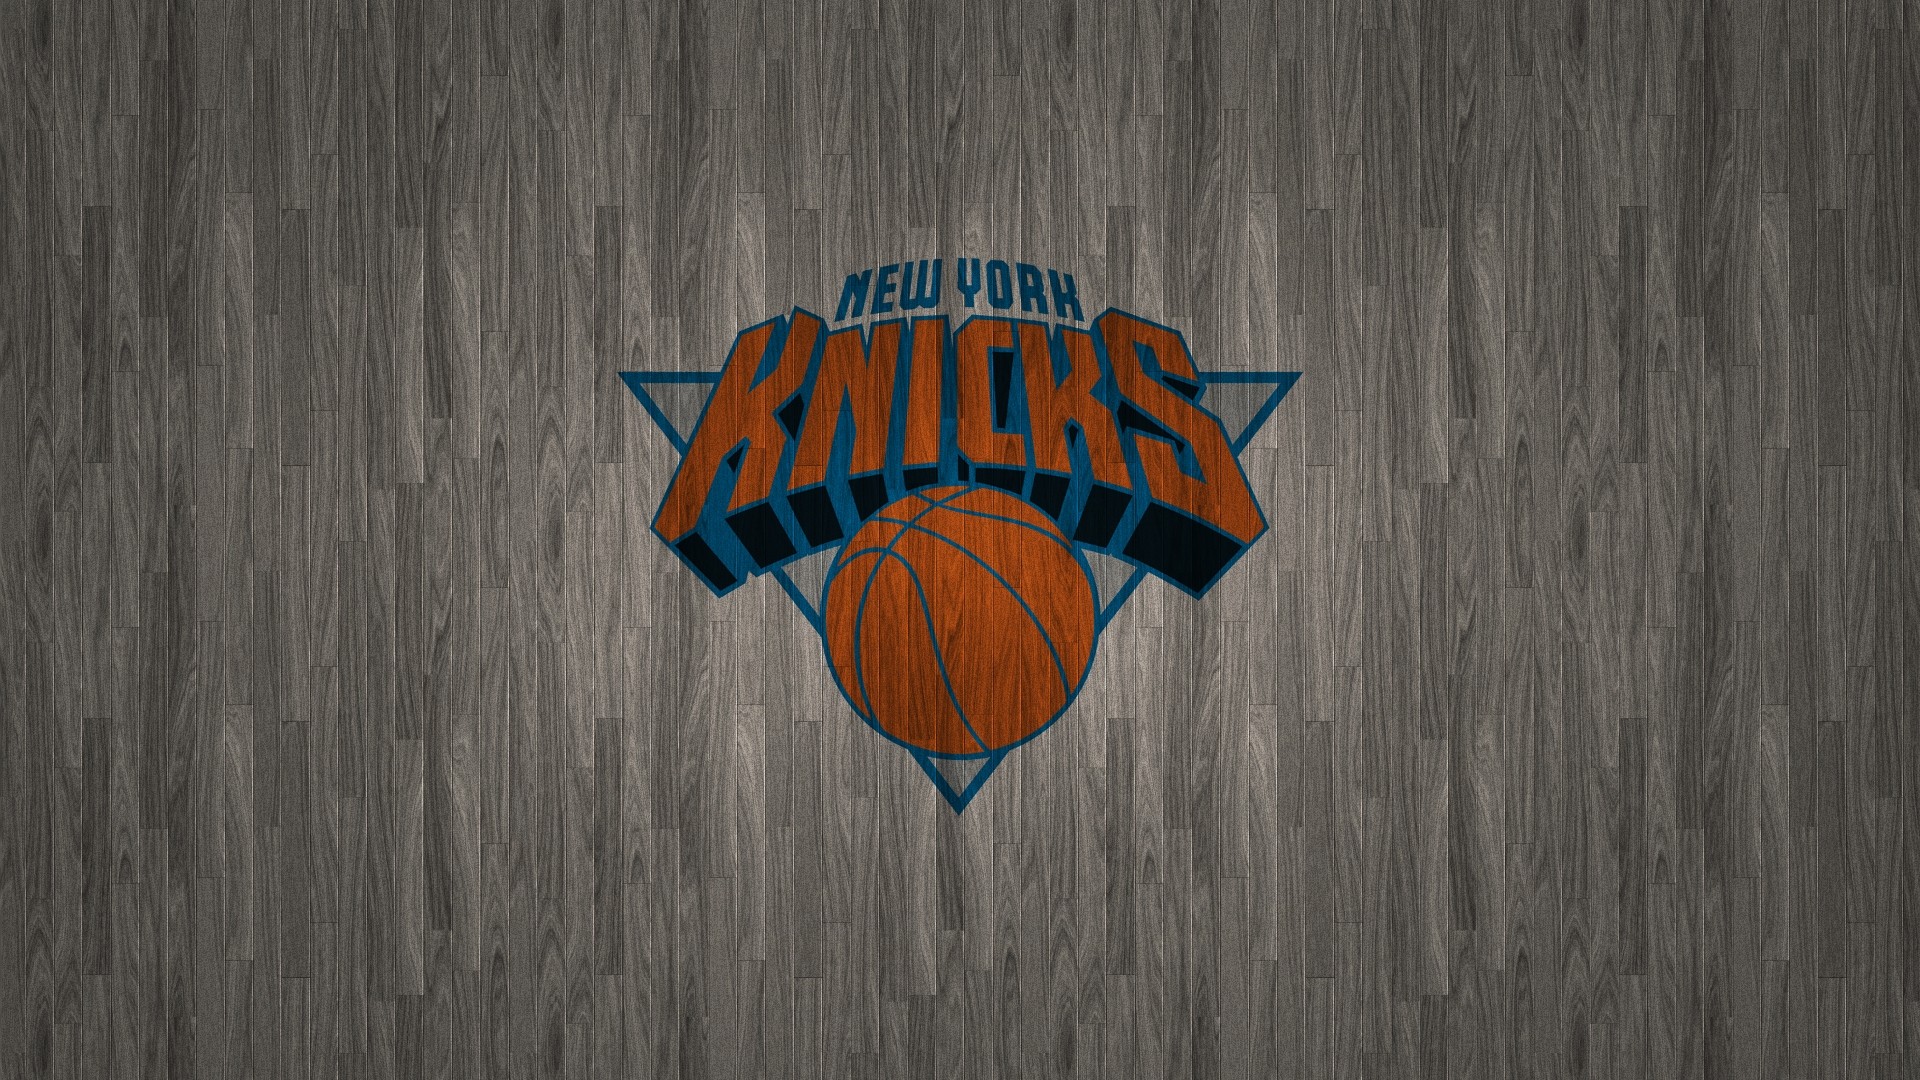 Knicks Wallpaper with image dimensions 1920x1080 pixel. You can make this wallpaper for your Desktop Computer Backgrounds, Windows or Mac Screensavers, iPhone Lock screen, Tablet or Android and another Mobile Phone device